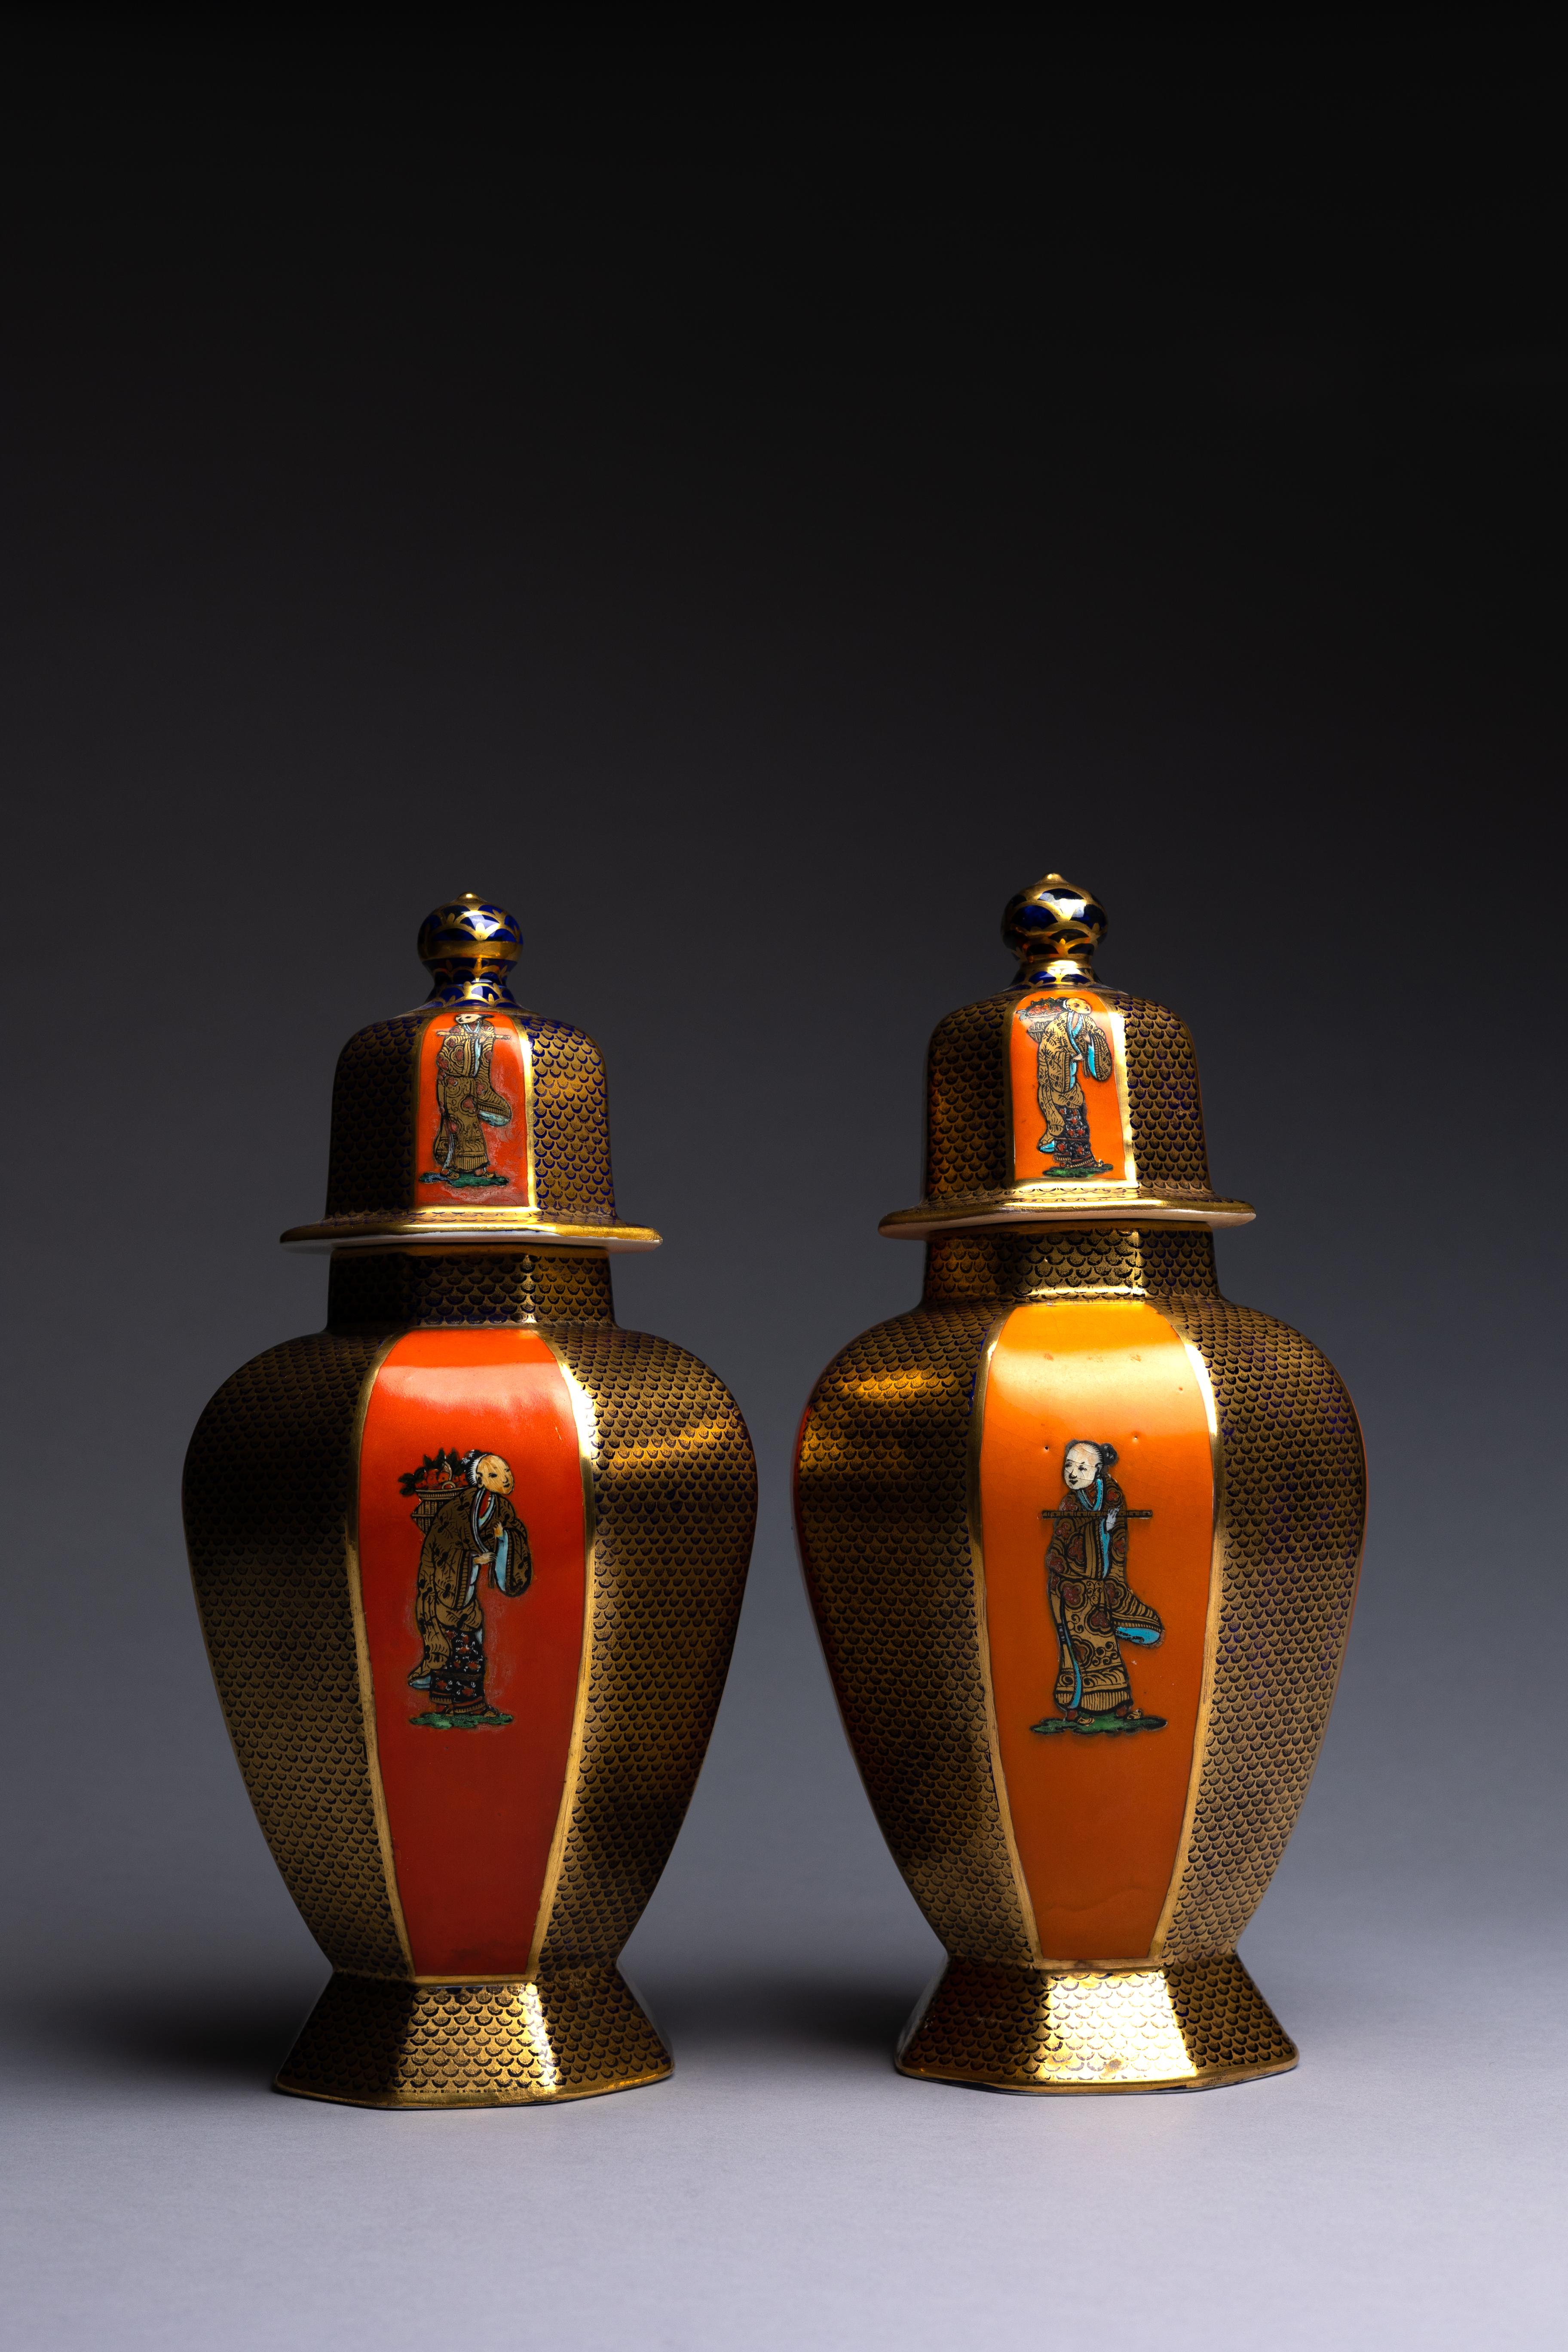 A pair of Masons Ashworth ironstone covered jars on a striking orange glaze with hand-painted Chinese figures, made in England circa 1910.

These Masons ironstone vases make a striking statement with a bright orange glaze underneath cobalt,